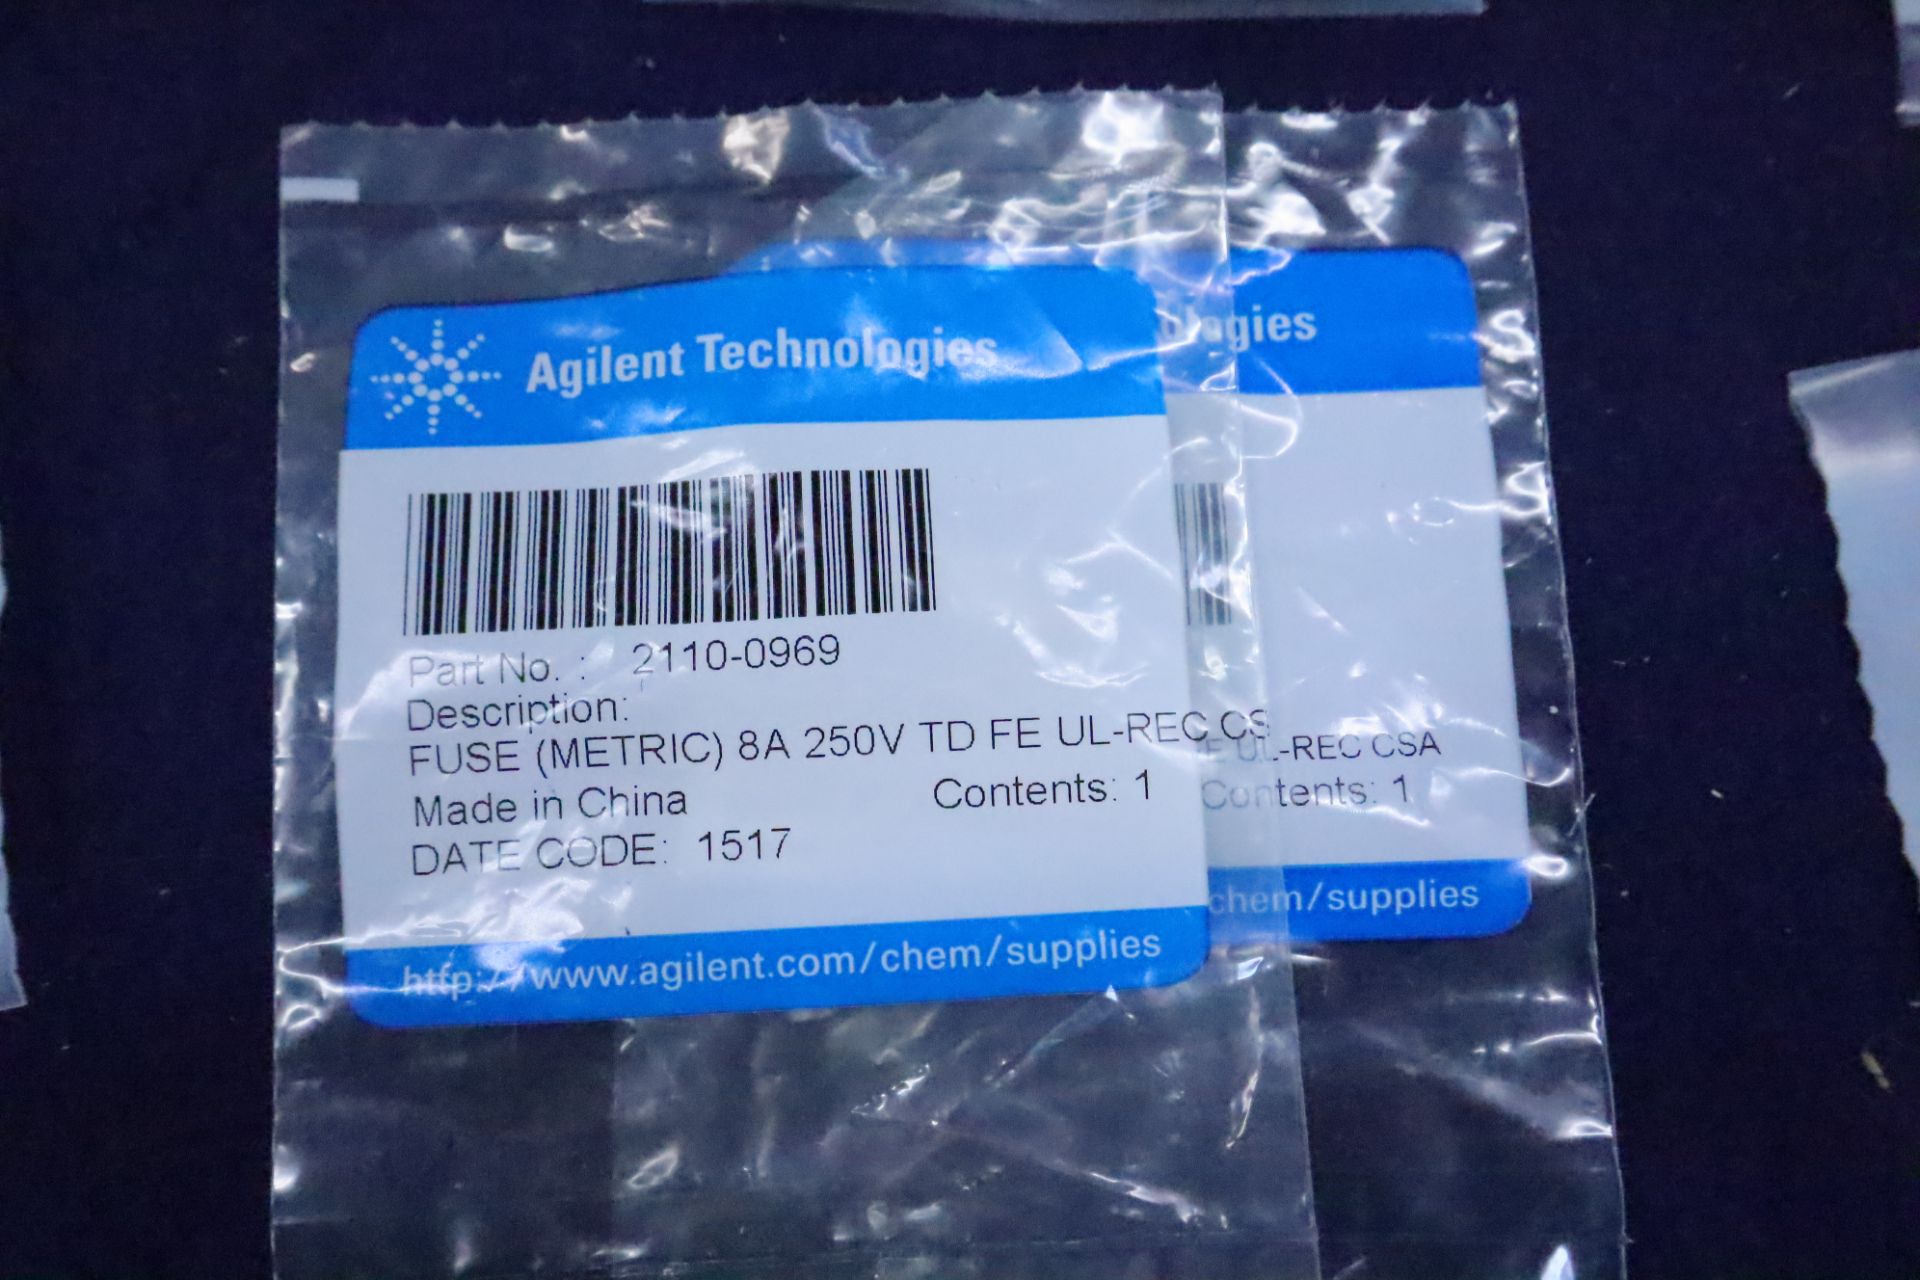 Agilent Technologies OEM Replacement Parts, Booklets and Recovery Drive - Image 22 of 32